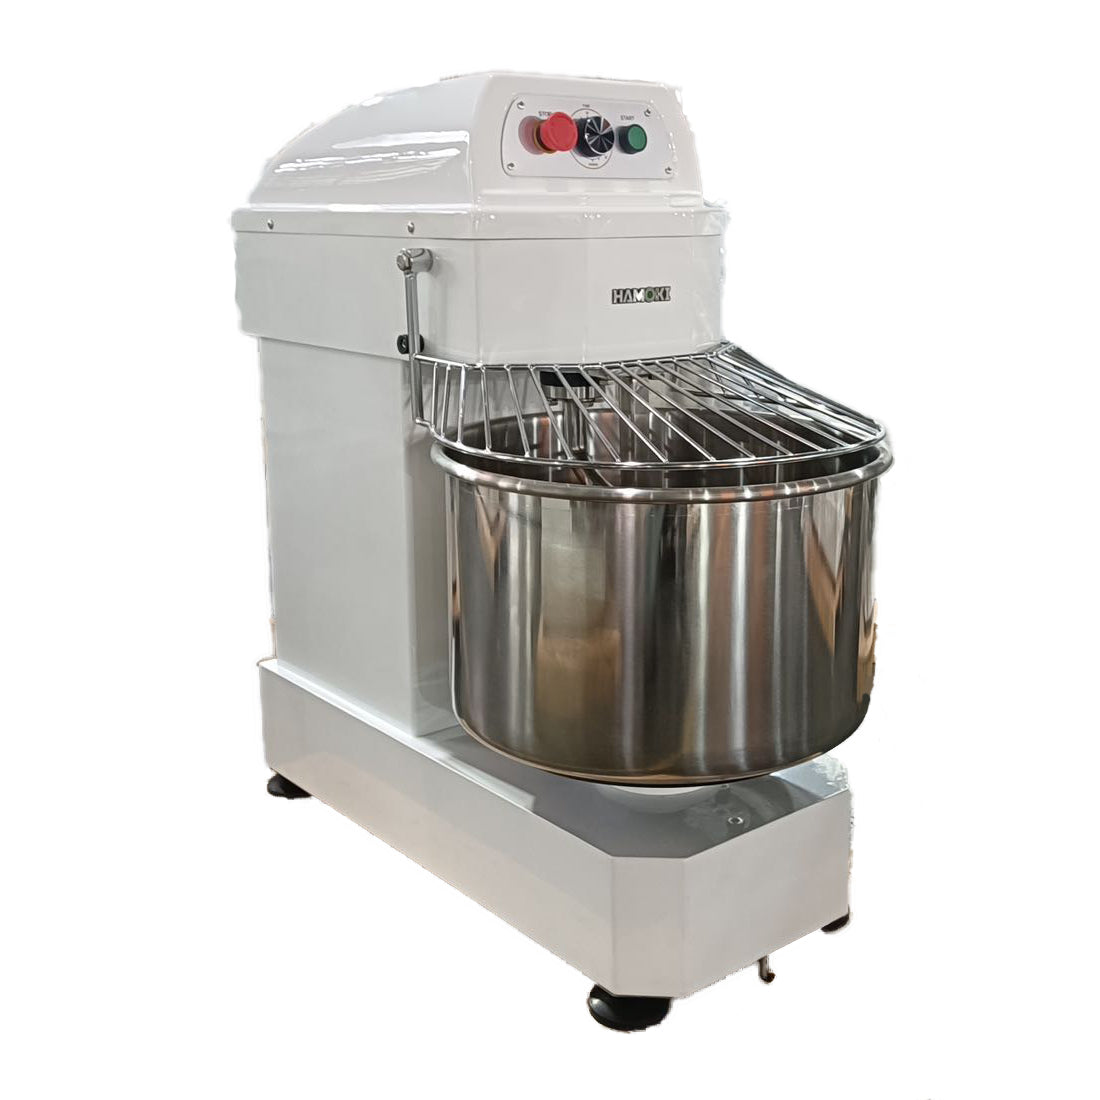 271004 - Spiral Mixer 50 Litre with one speed (HS50)